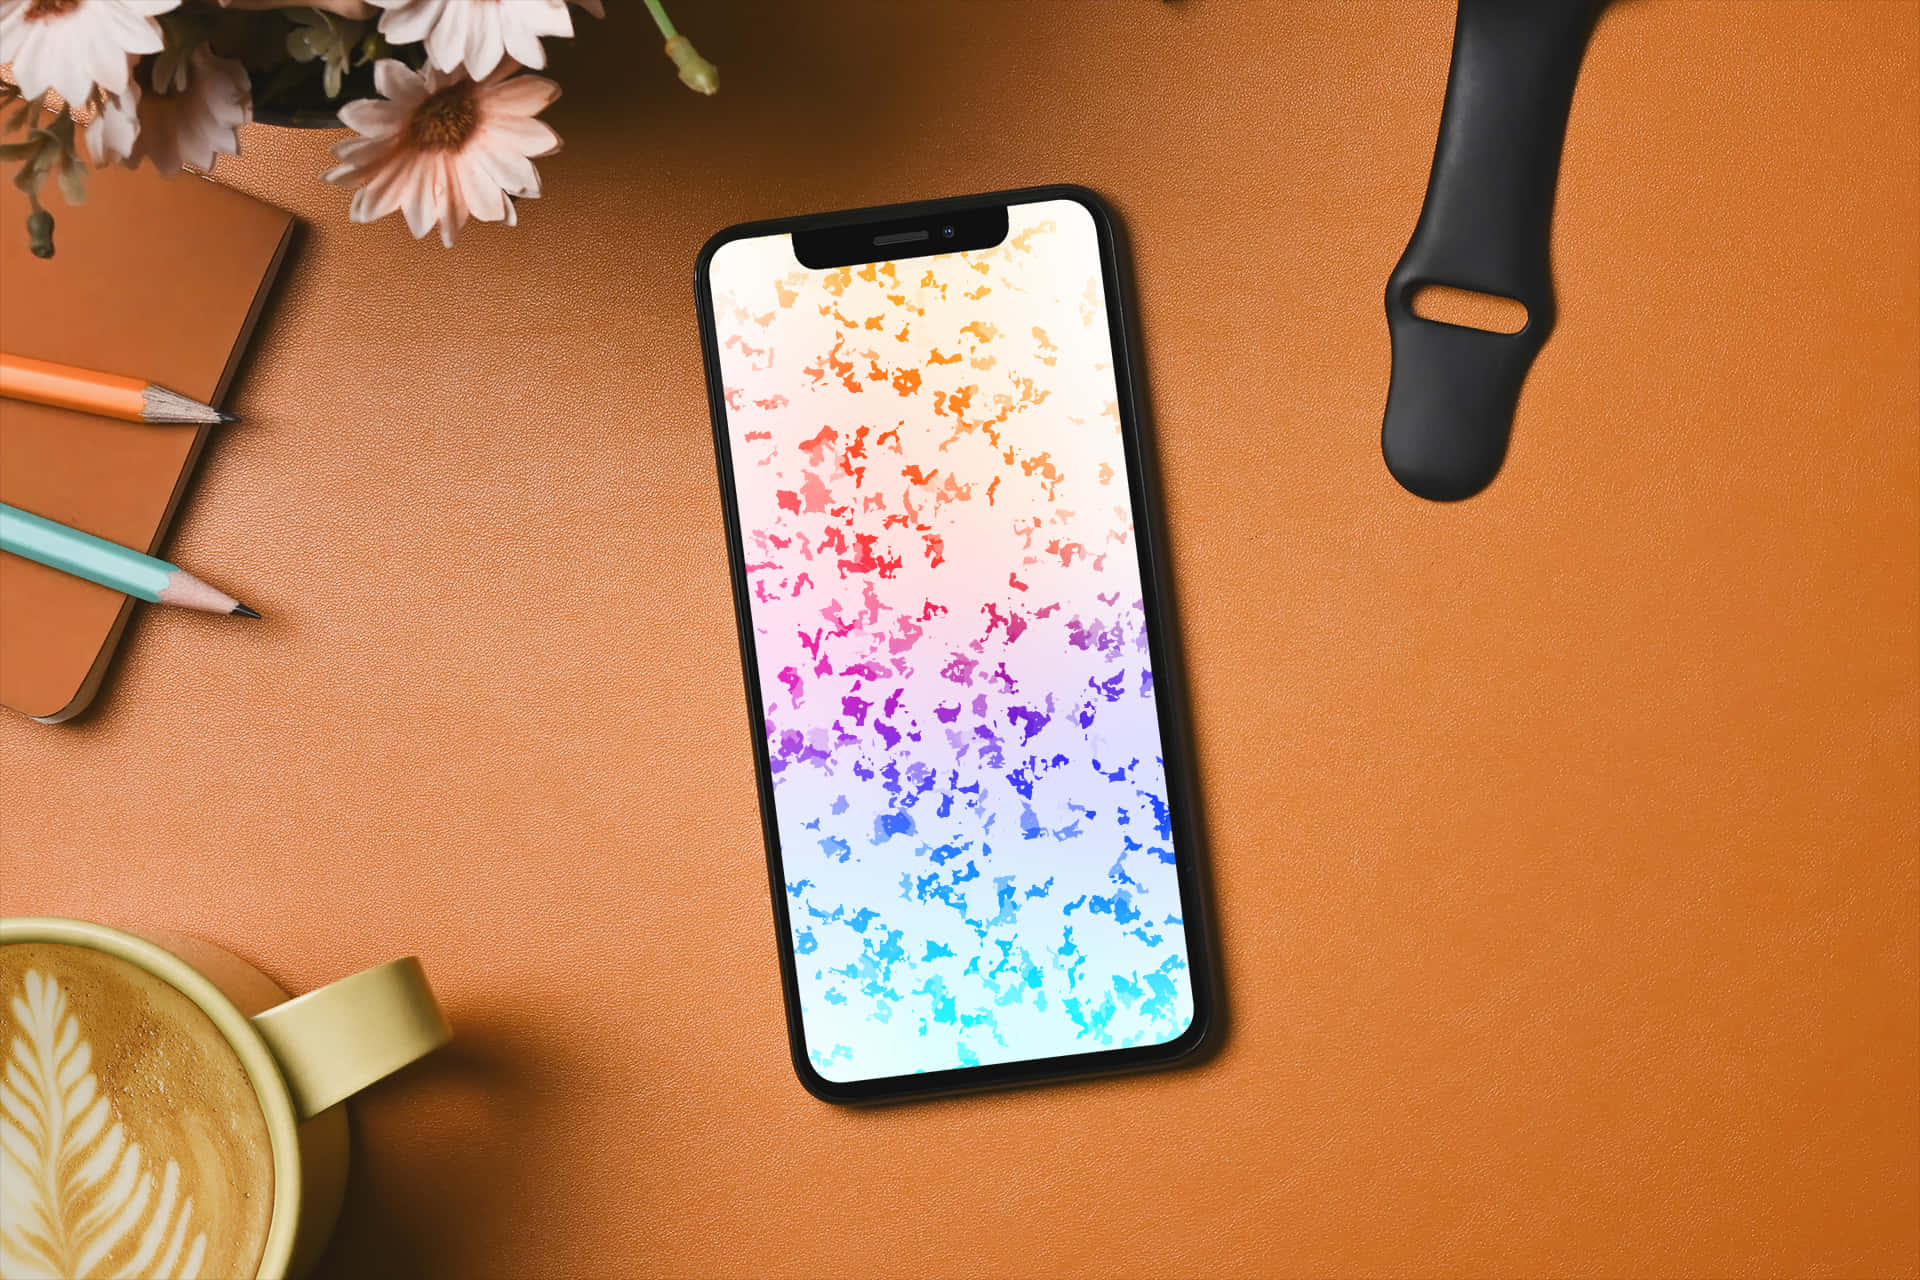 Phone Screen Showing Colorful Perturbed Design Wallpaper